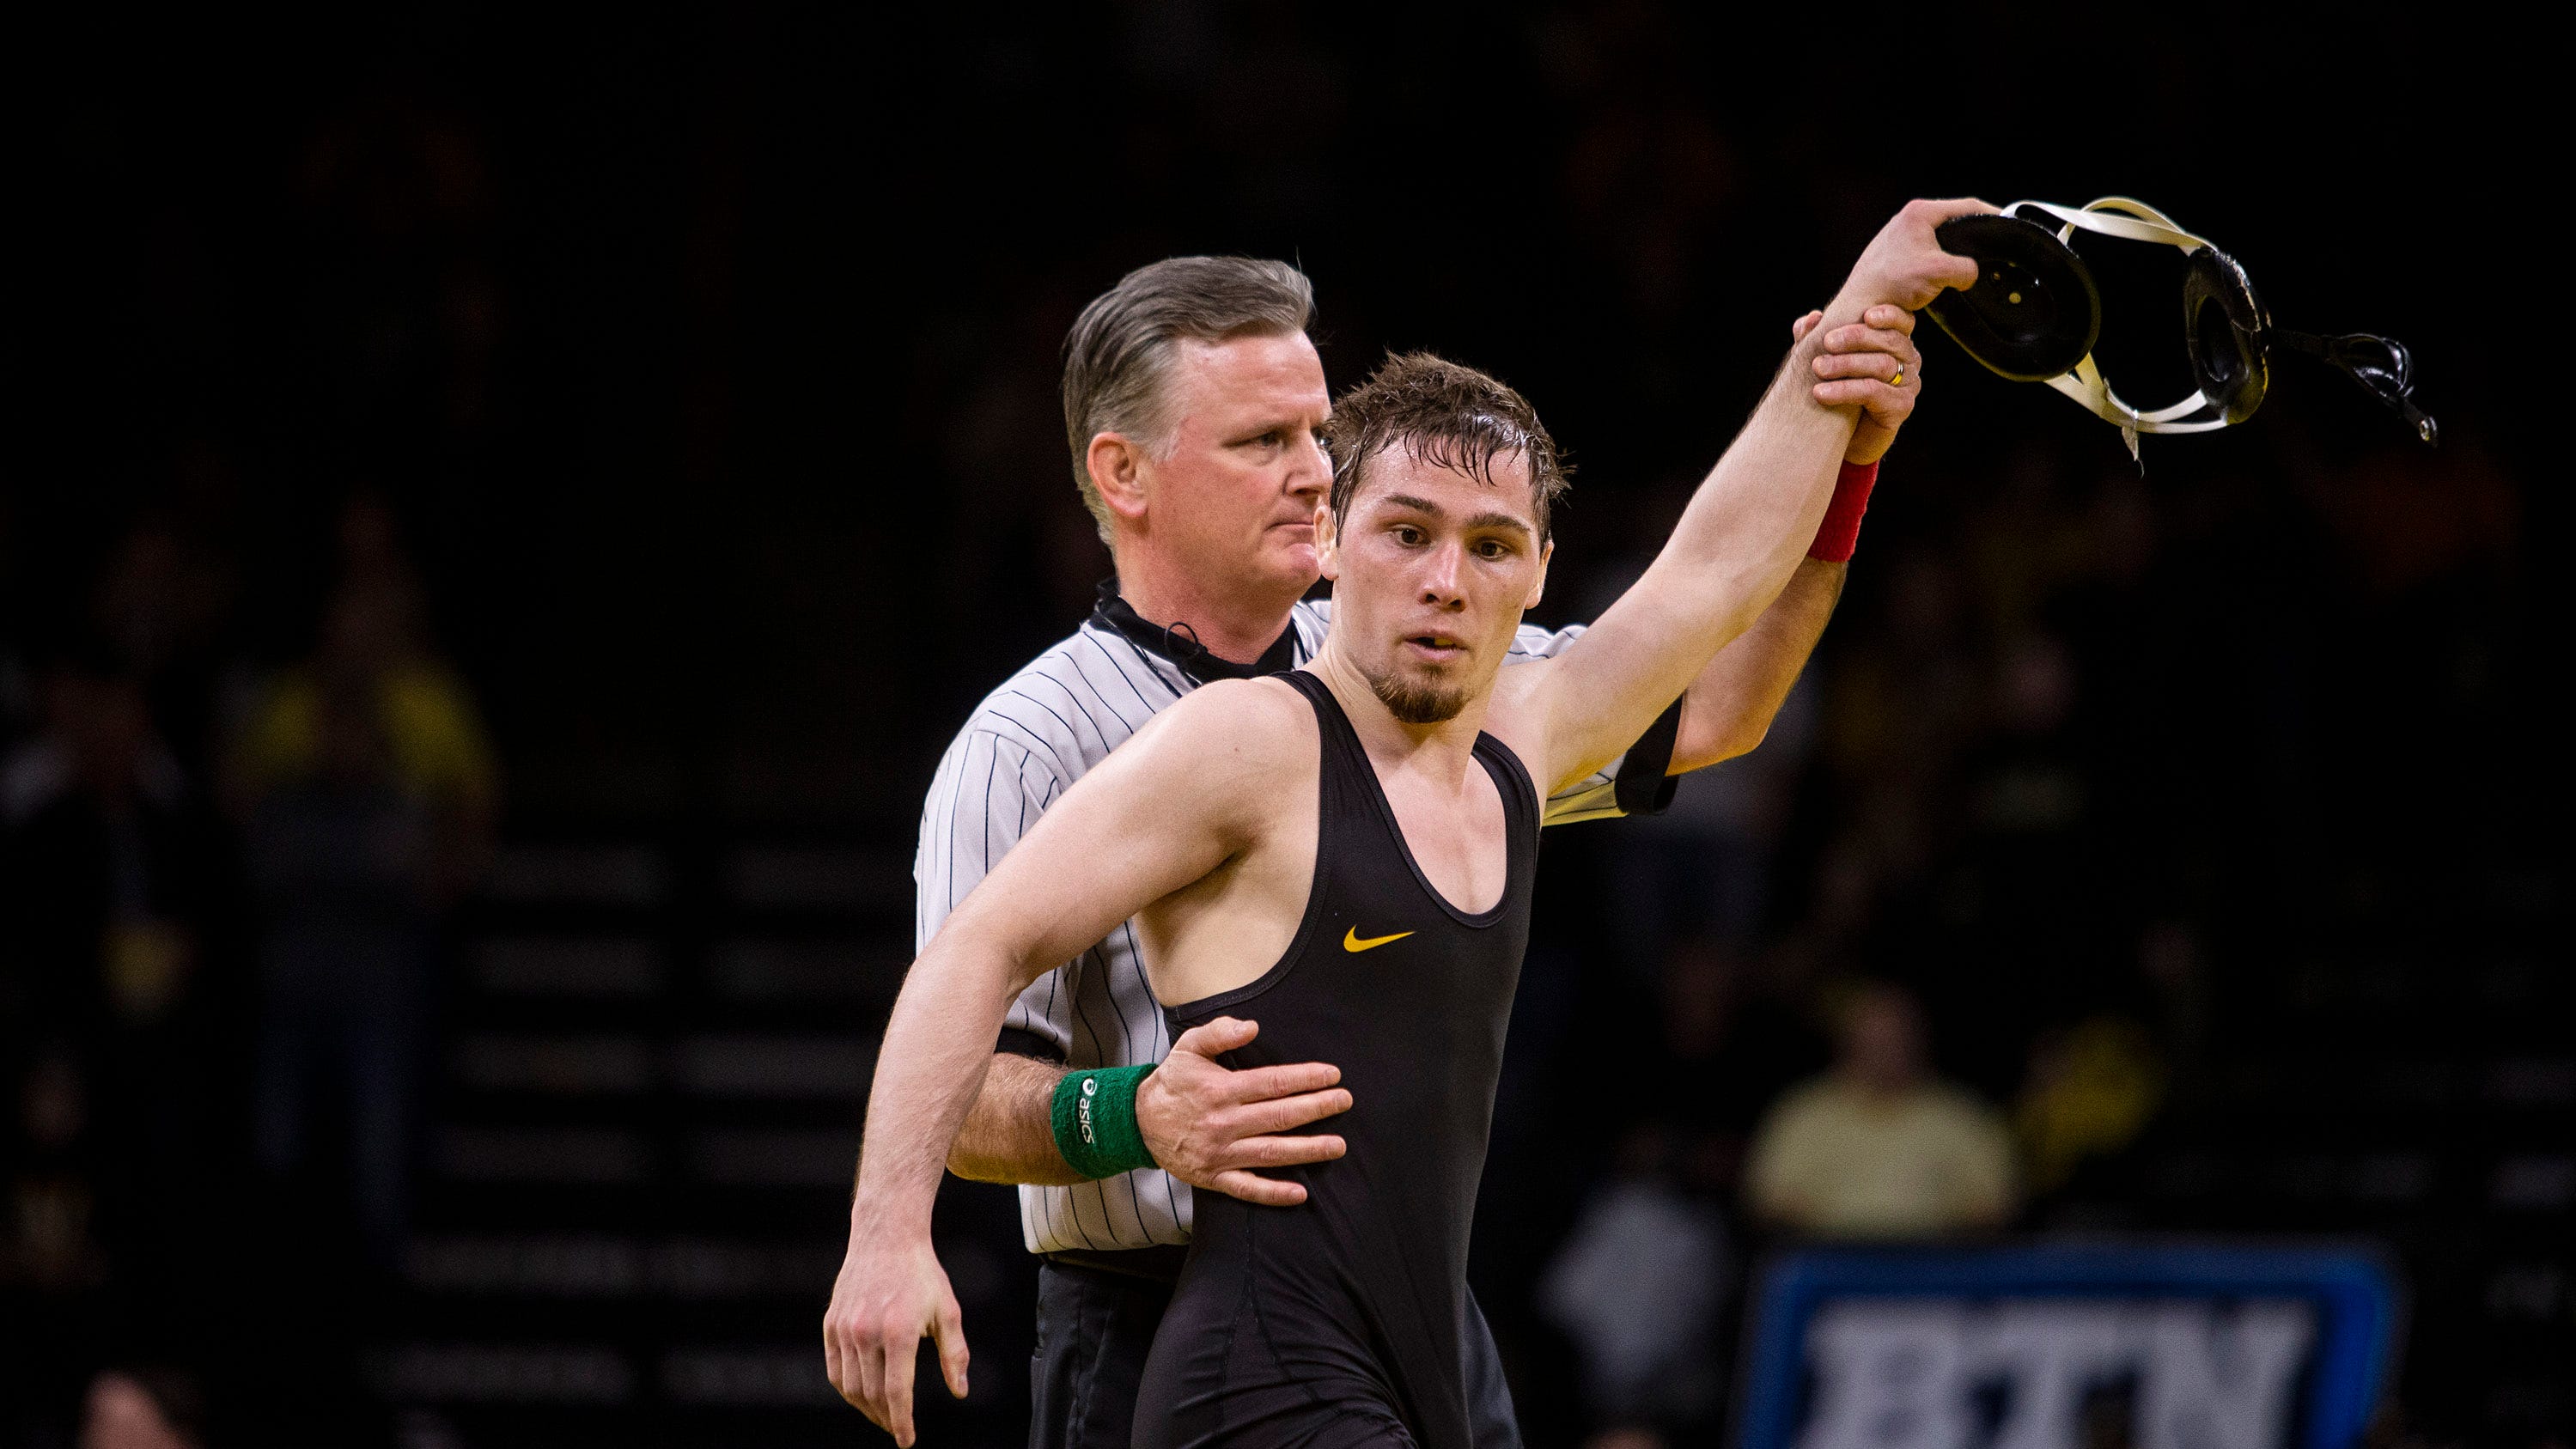 NCAA wrestling: It's go-time for Spencer Lee's and his vision for 2020